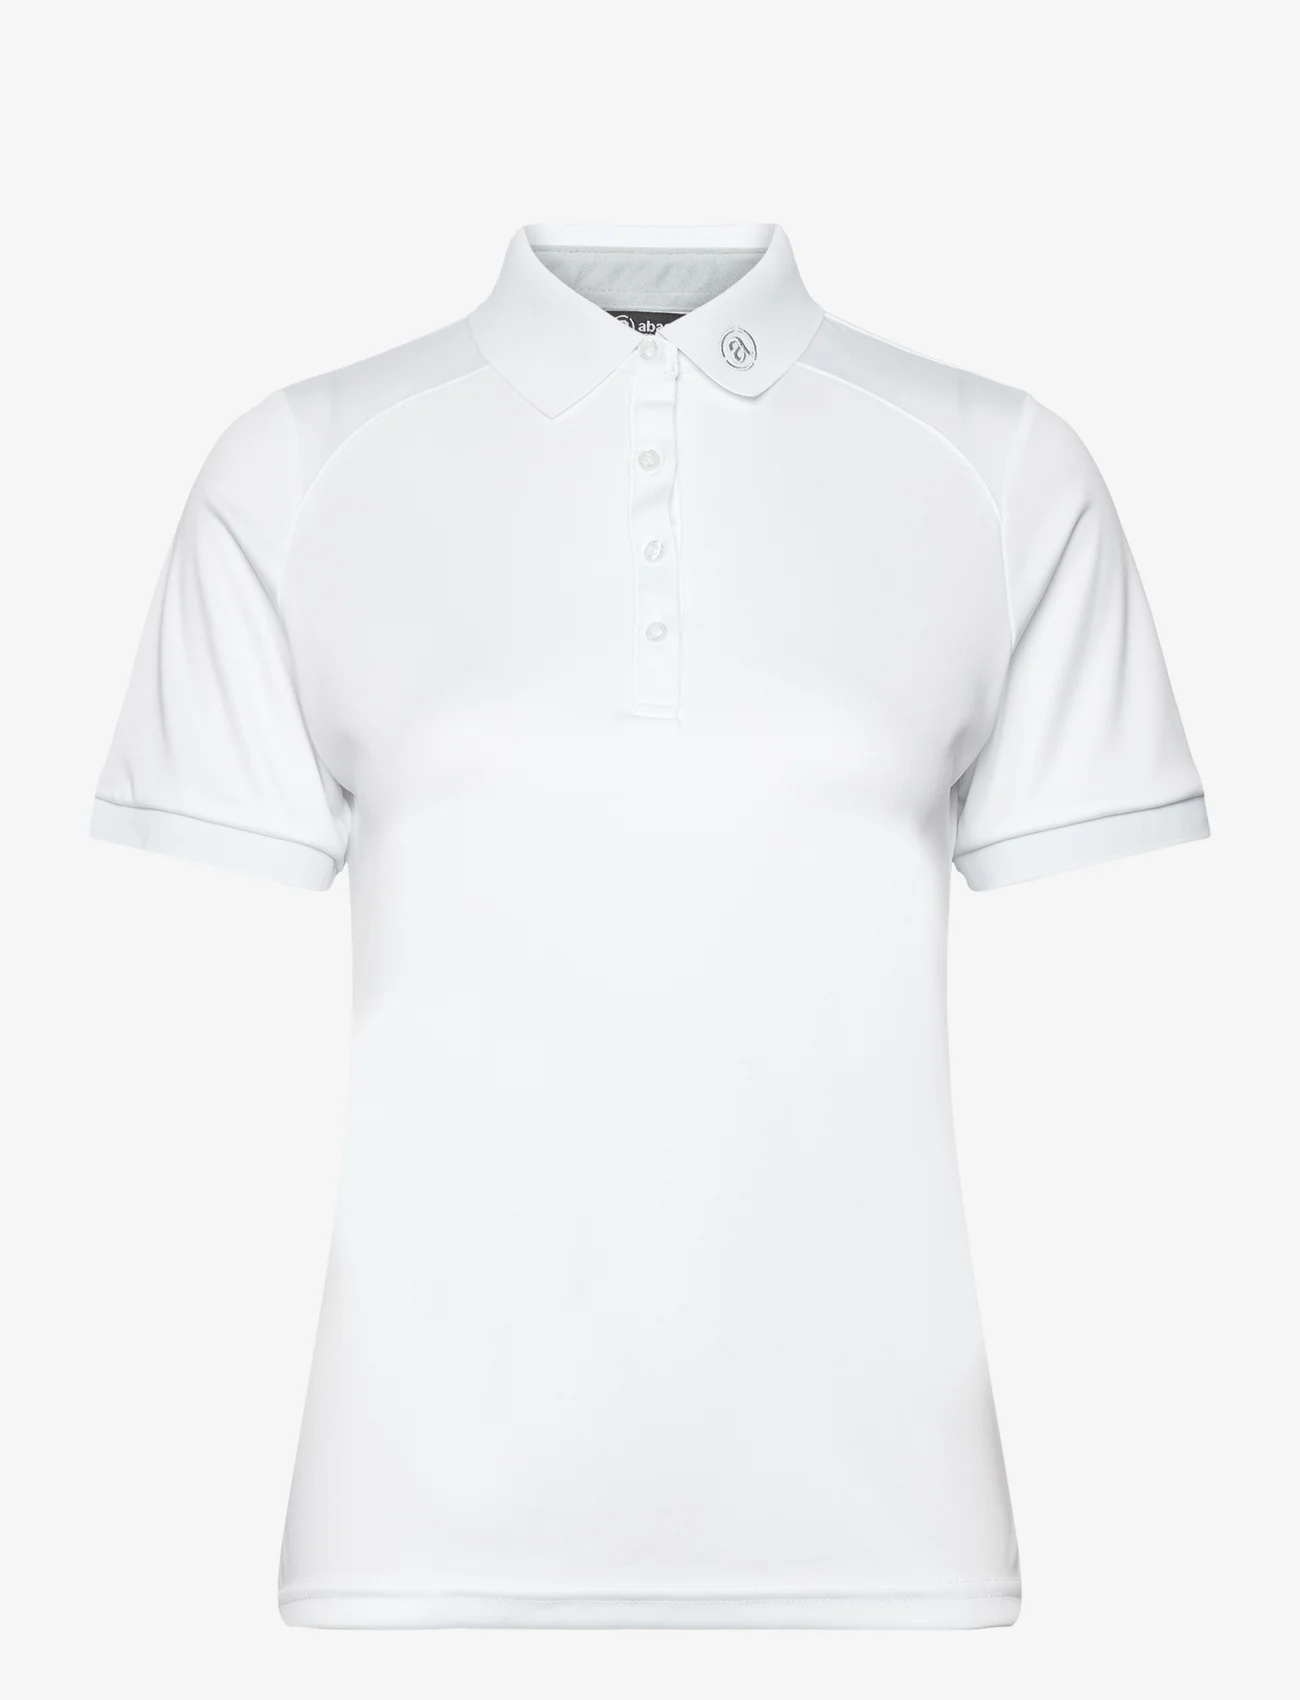 Abacus - Lds Hammel drycool polo - toppe & t-shirts - white - 0